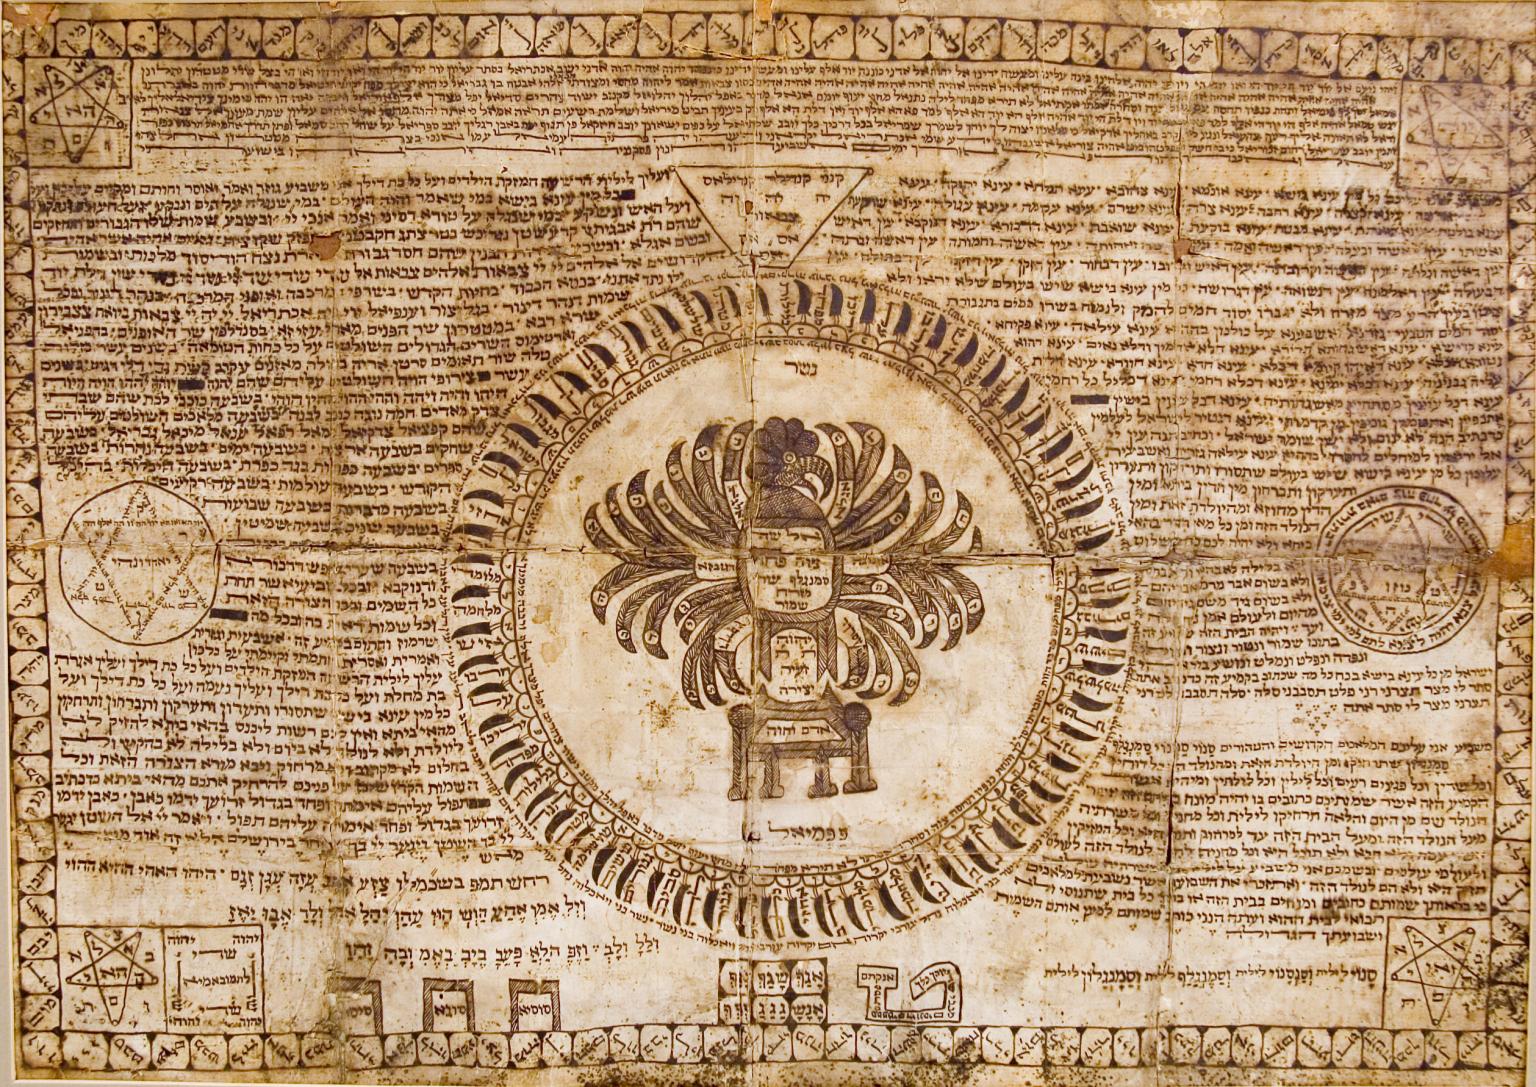 Single page in ink on vellum featuring image of throne in center with bird of prey above, surrounded by Hebrew writing. 